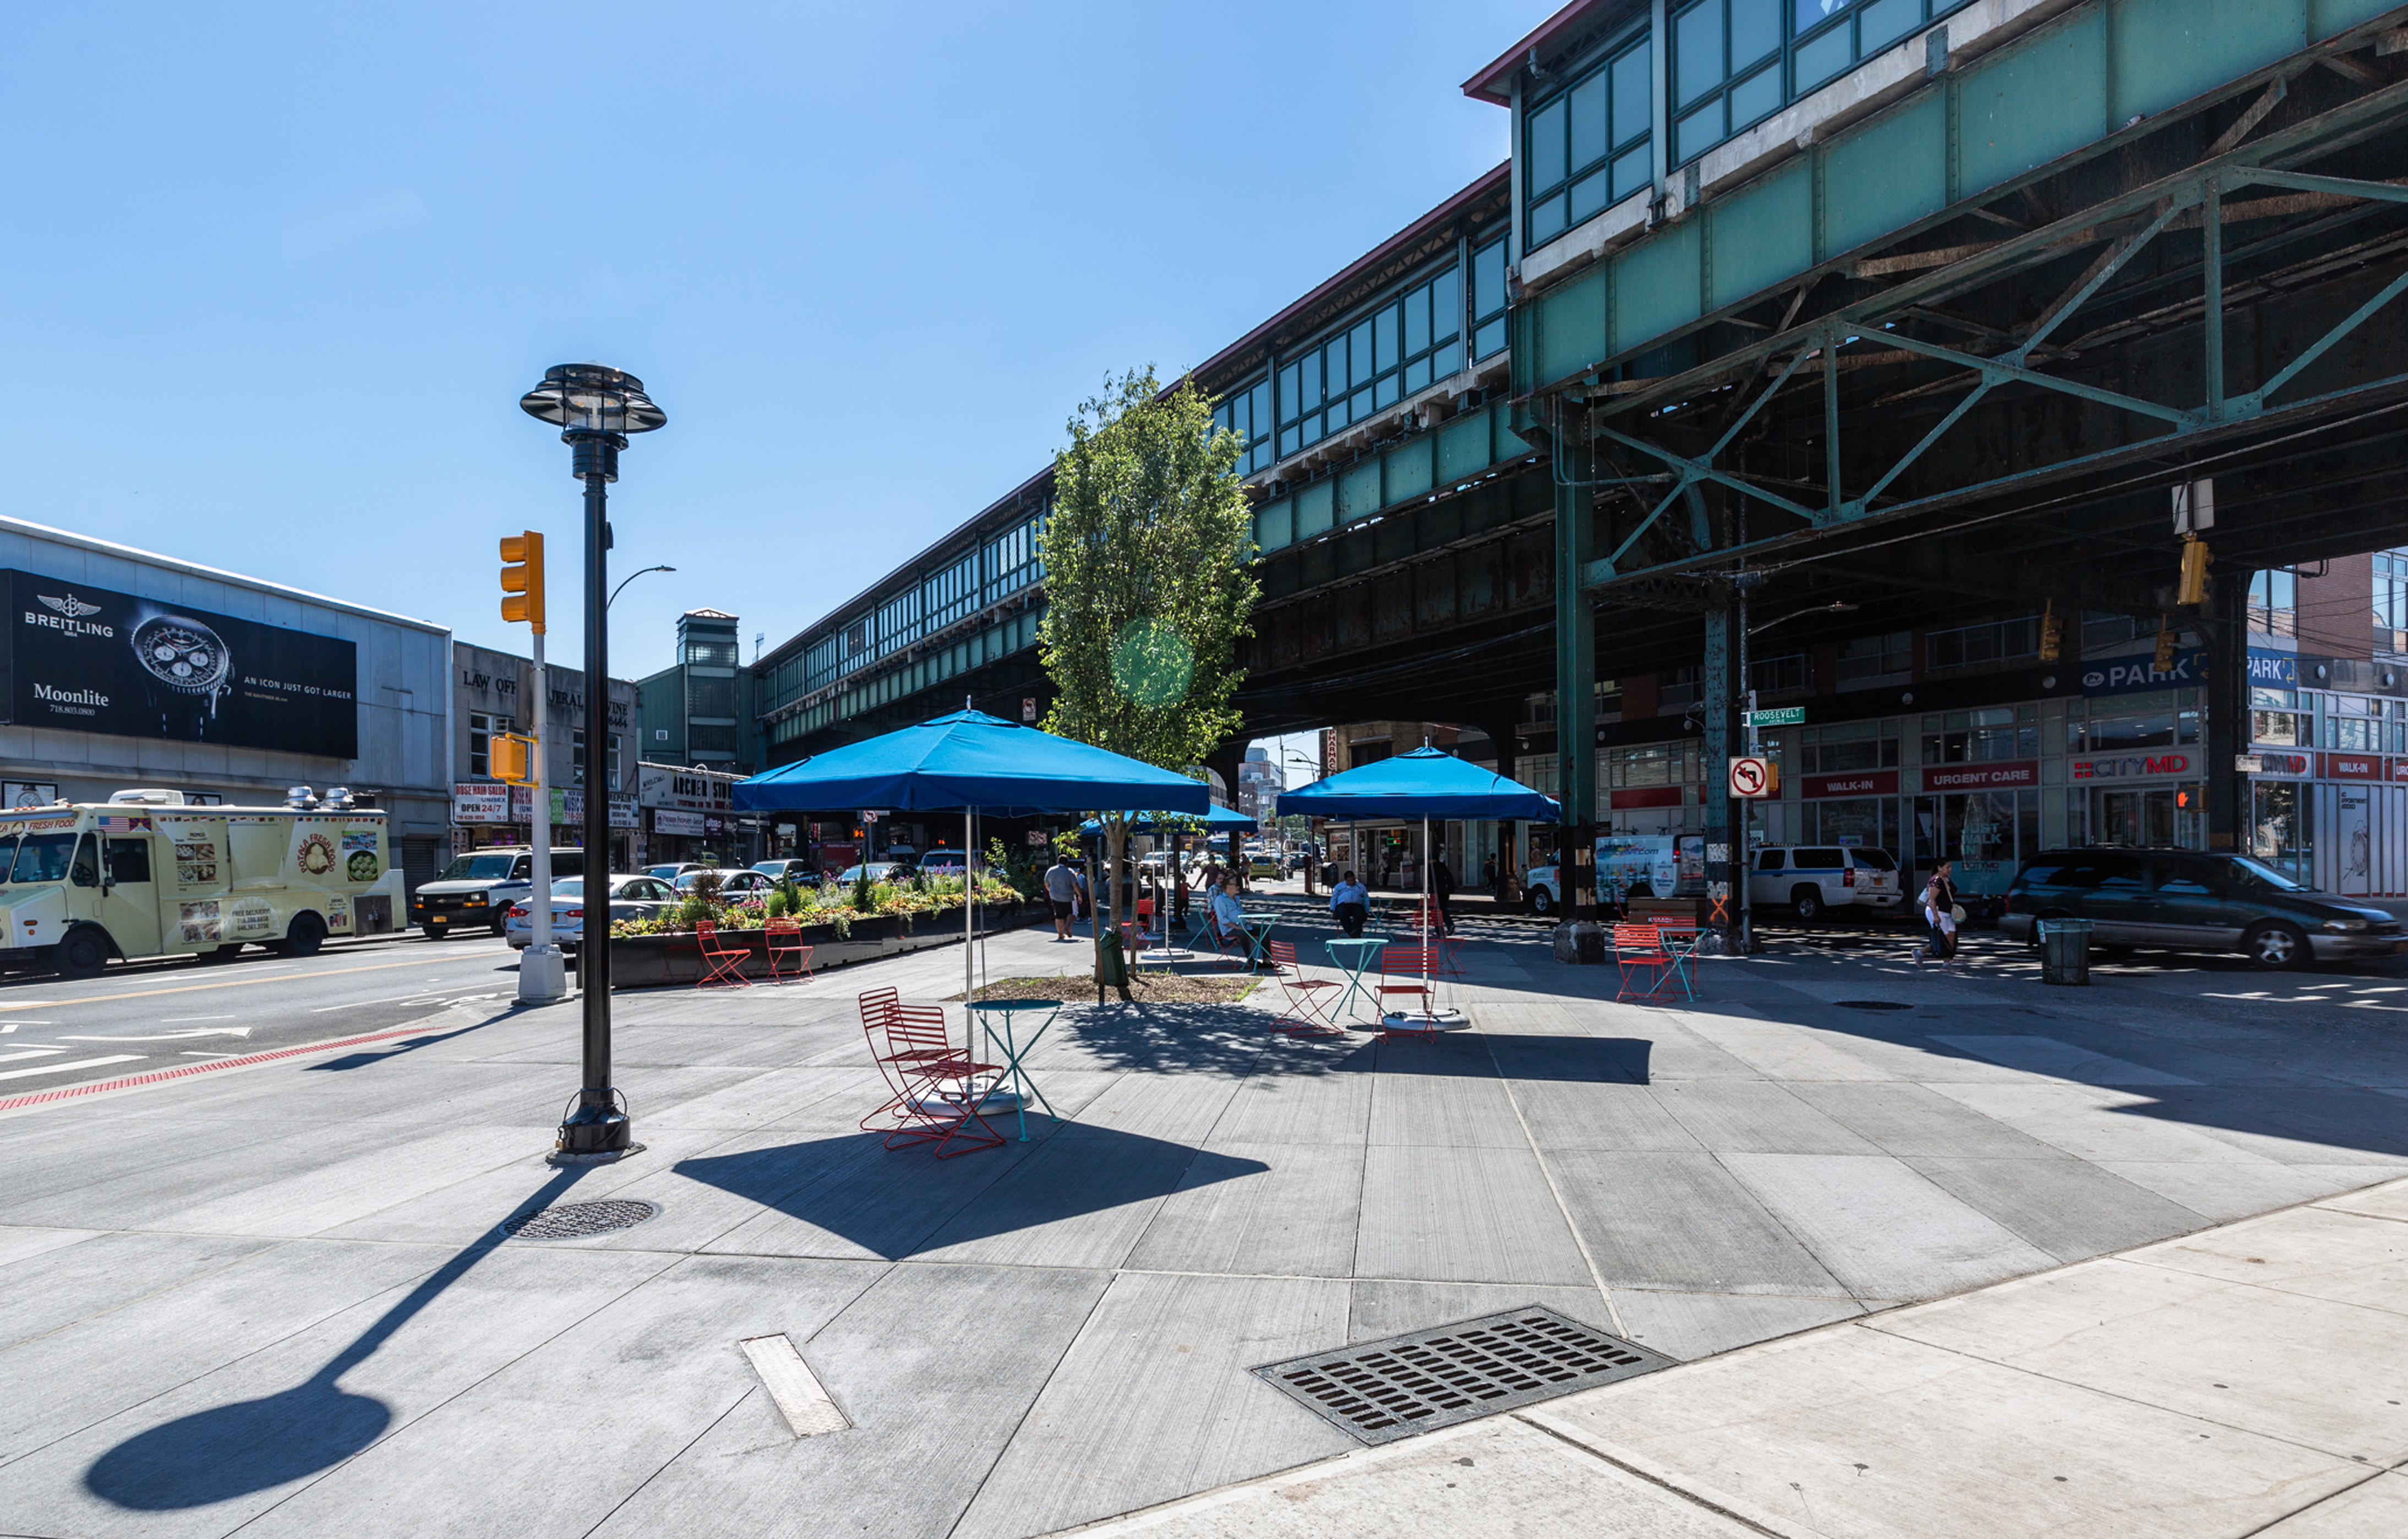 Diversity Plaza in Queens includes umbrellas, tables, and chairs
                                           